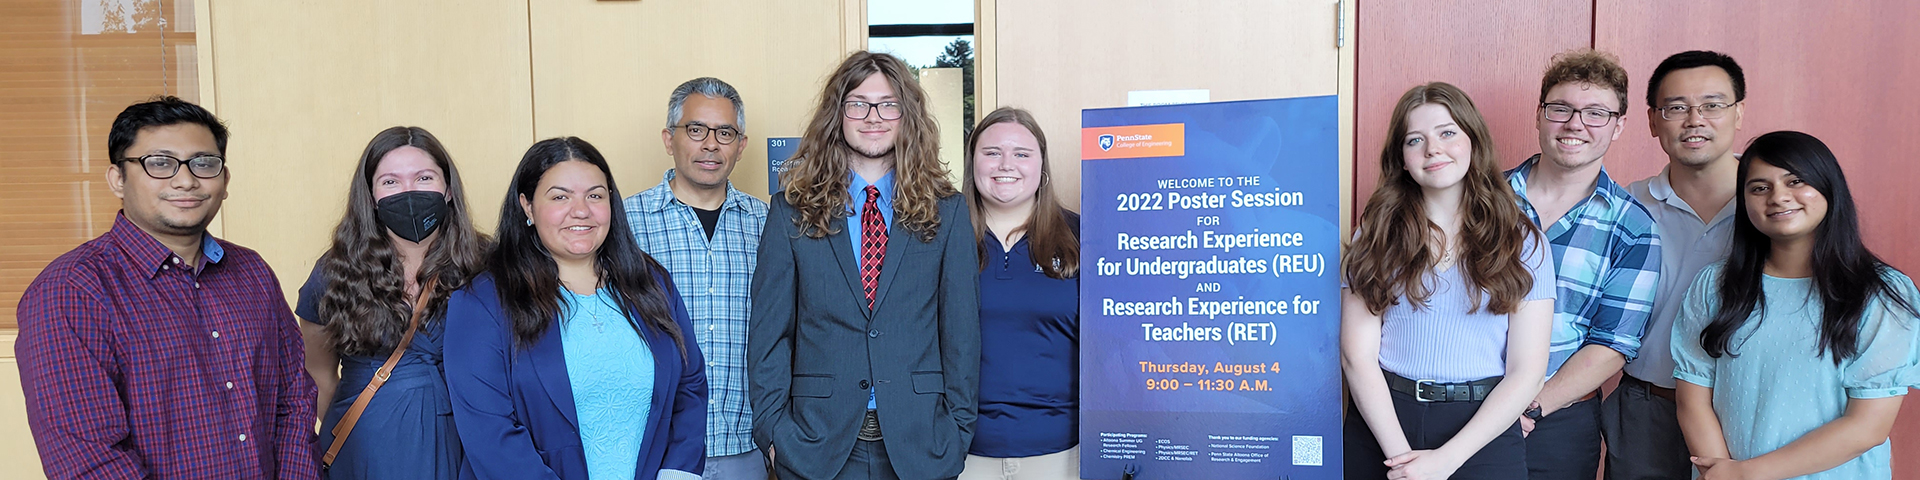 Students and faculty pose for a photo at a research fair.